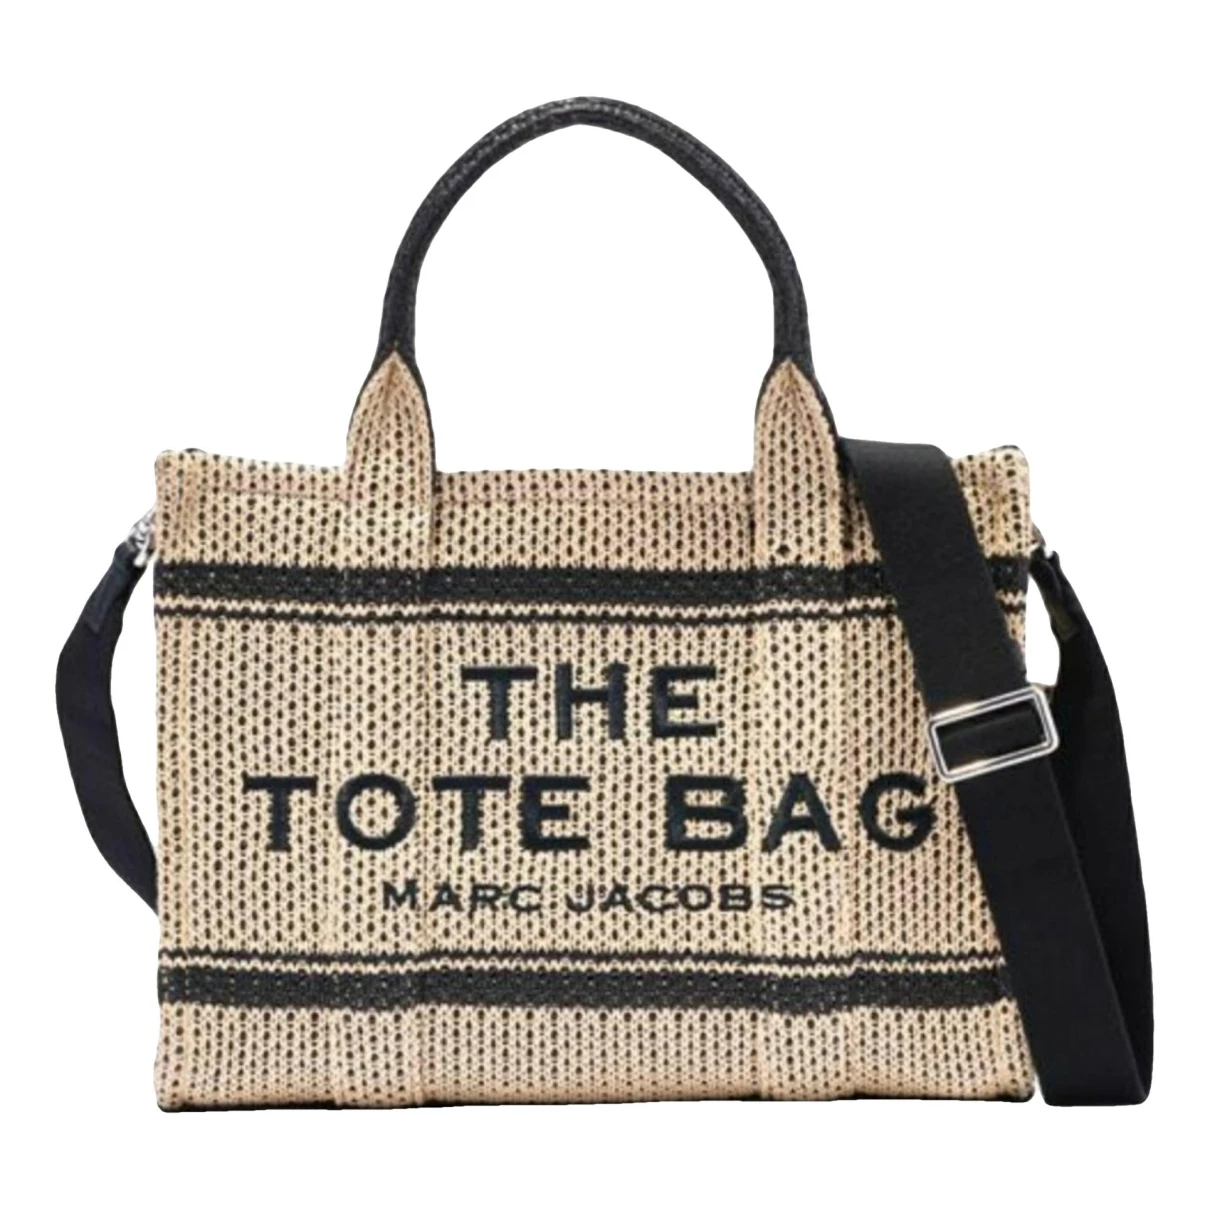 bags Marc Jacobs handbags The Tag Tote for Female Synthetic. Used condition